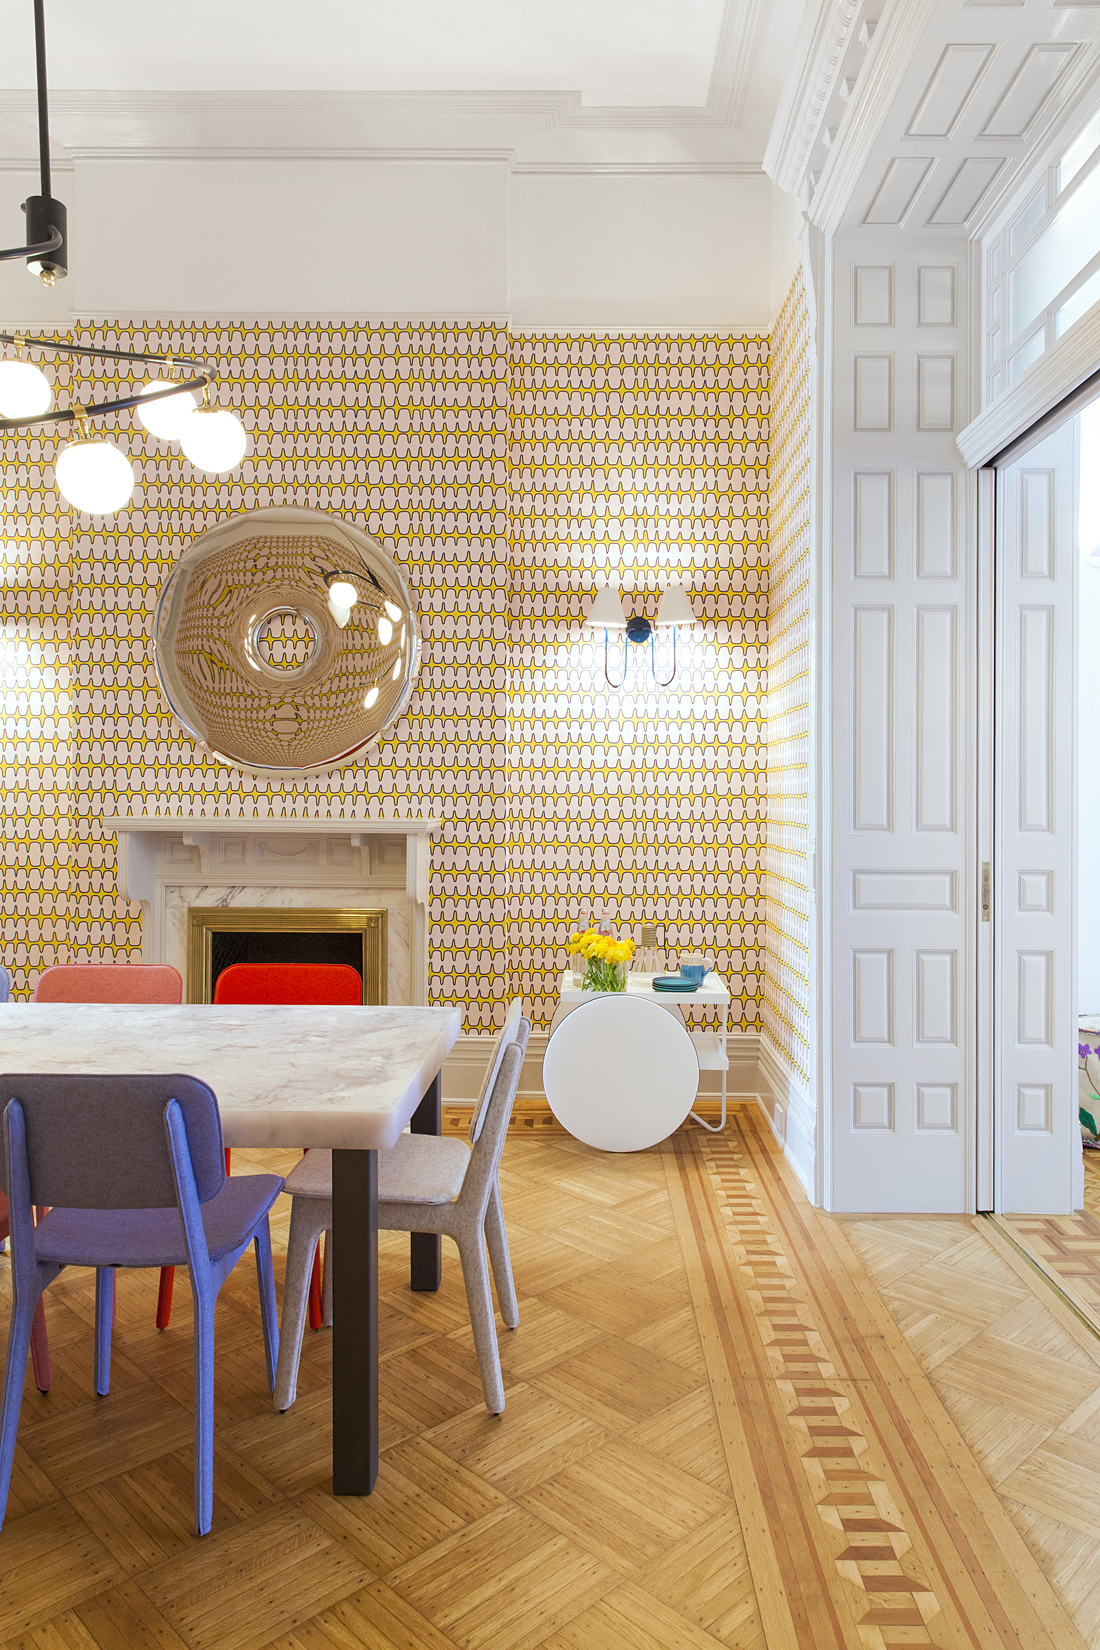 A Playful Dining Room by Reunion Goods & Services and Fogarty Finger Architecture